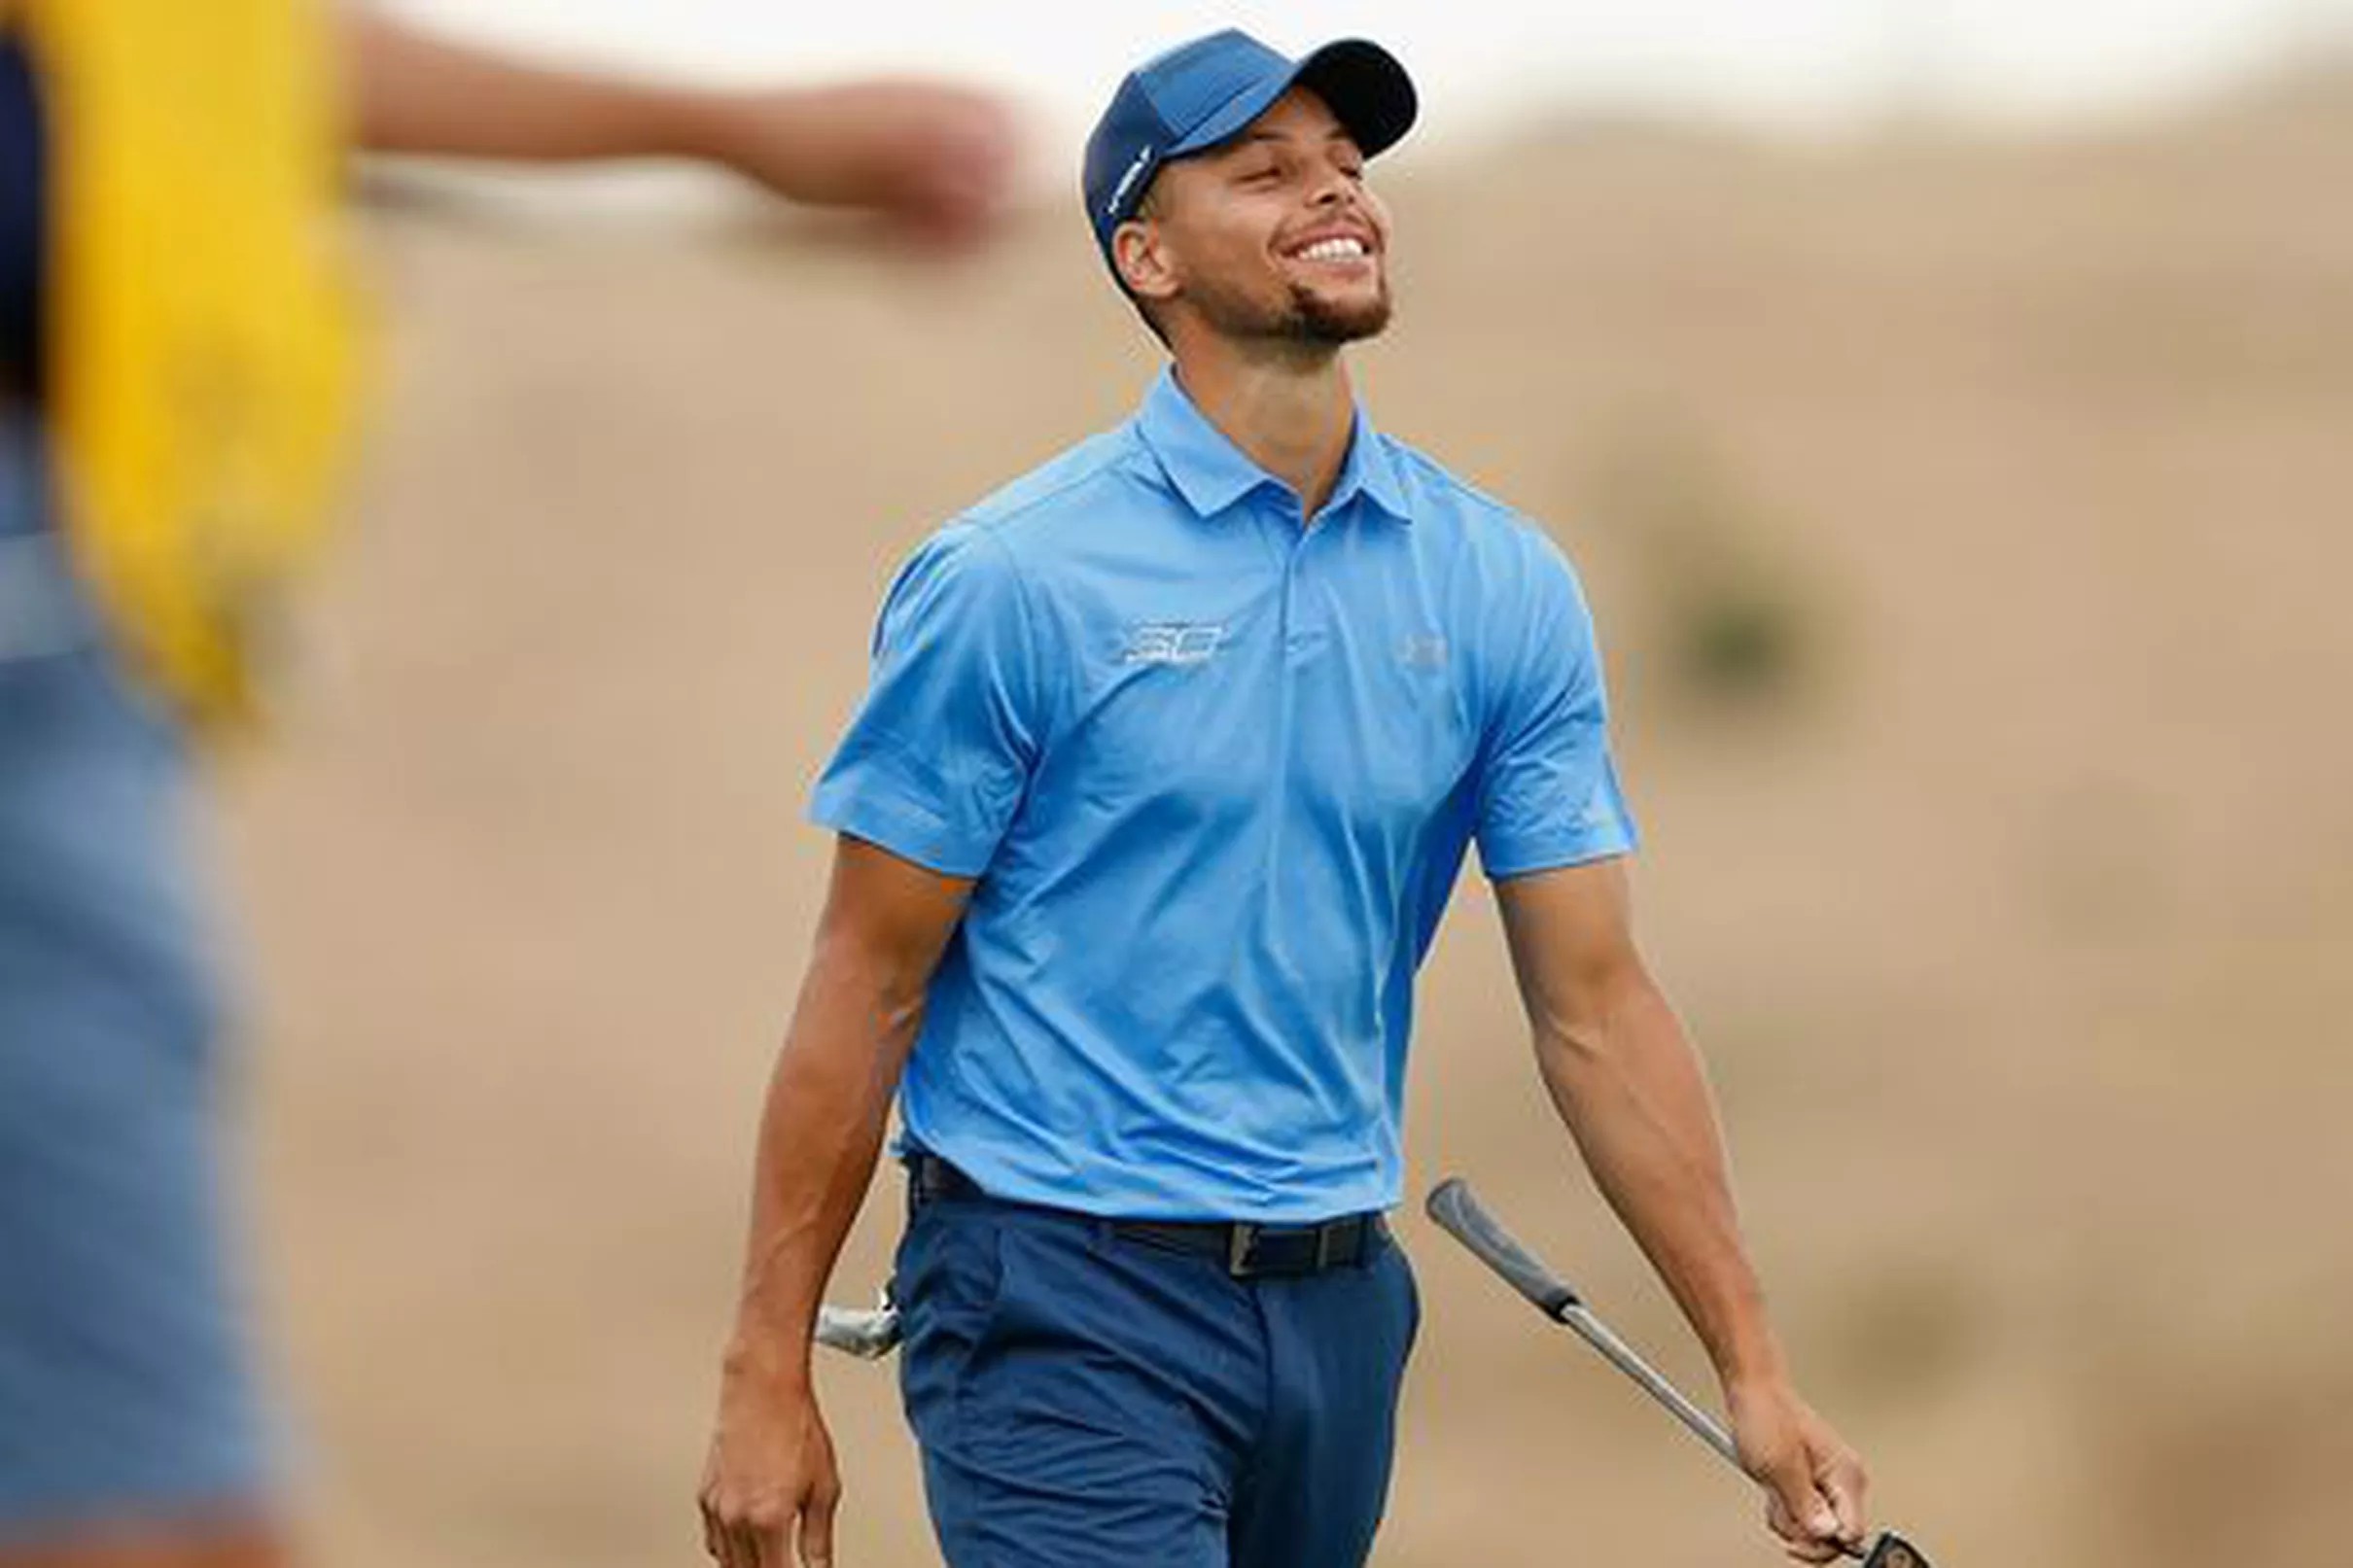 How Good is Steph Curry at Golf?